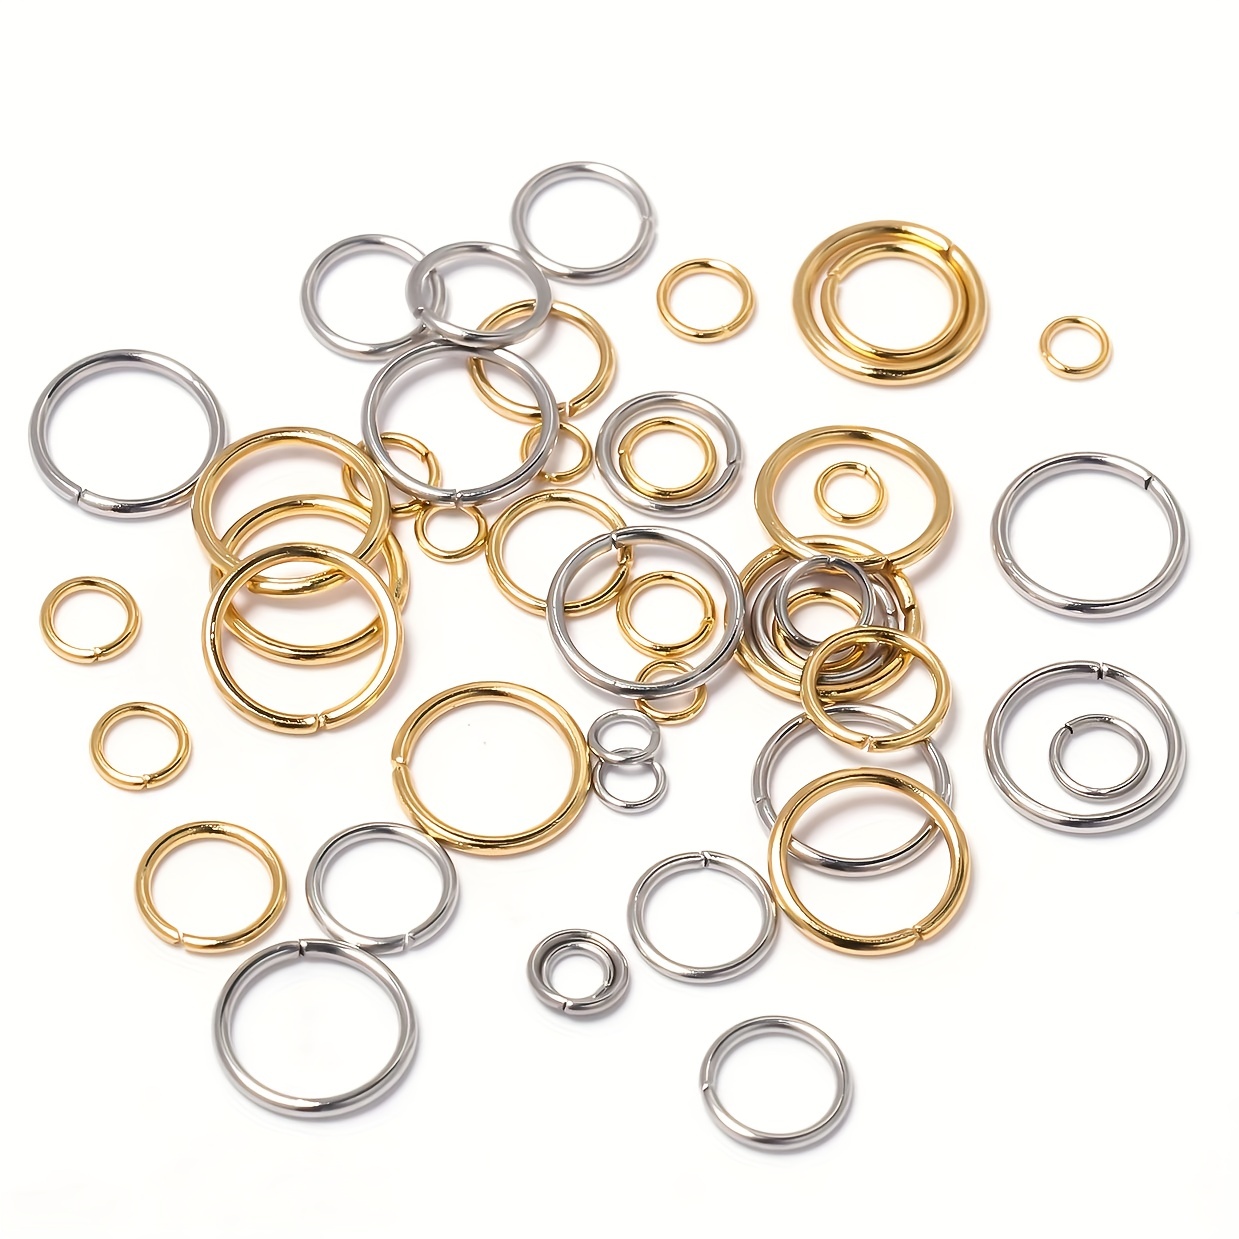 10g 304 Stainless Steel Unsoldered Jump Rings 3/4/5/6/7/8mm